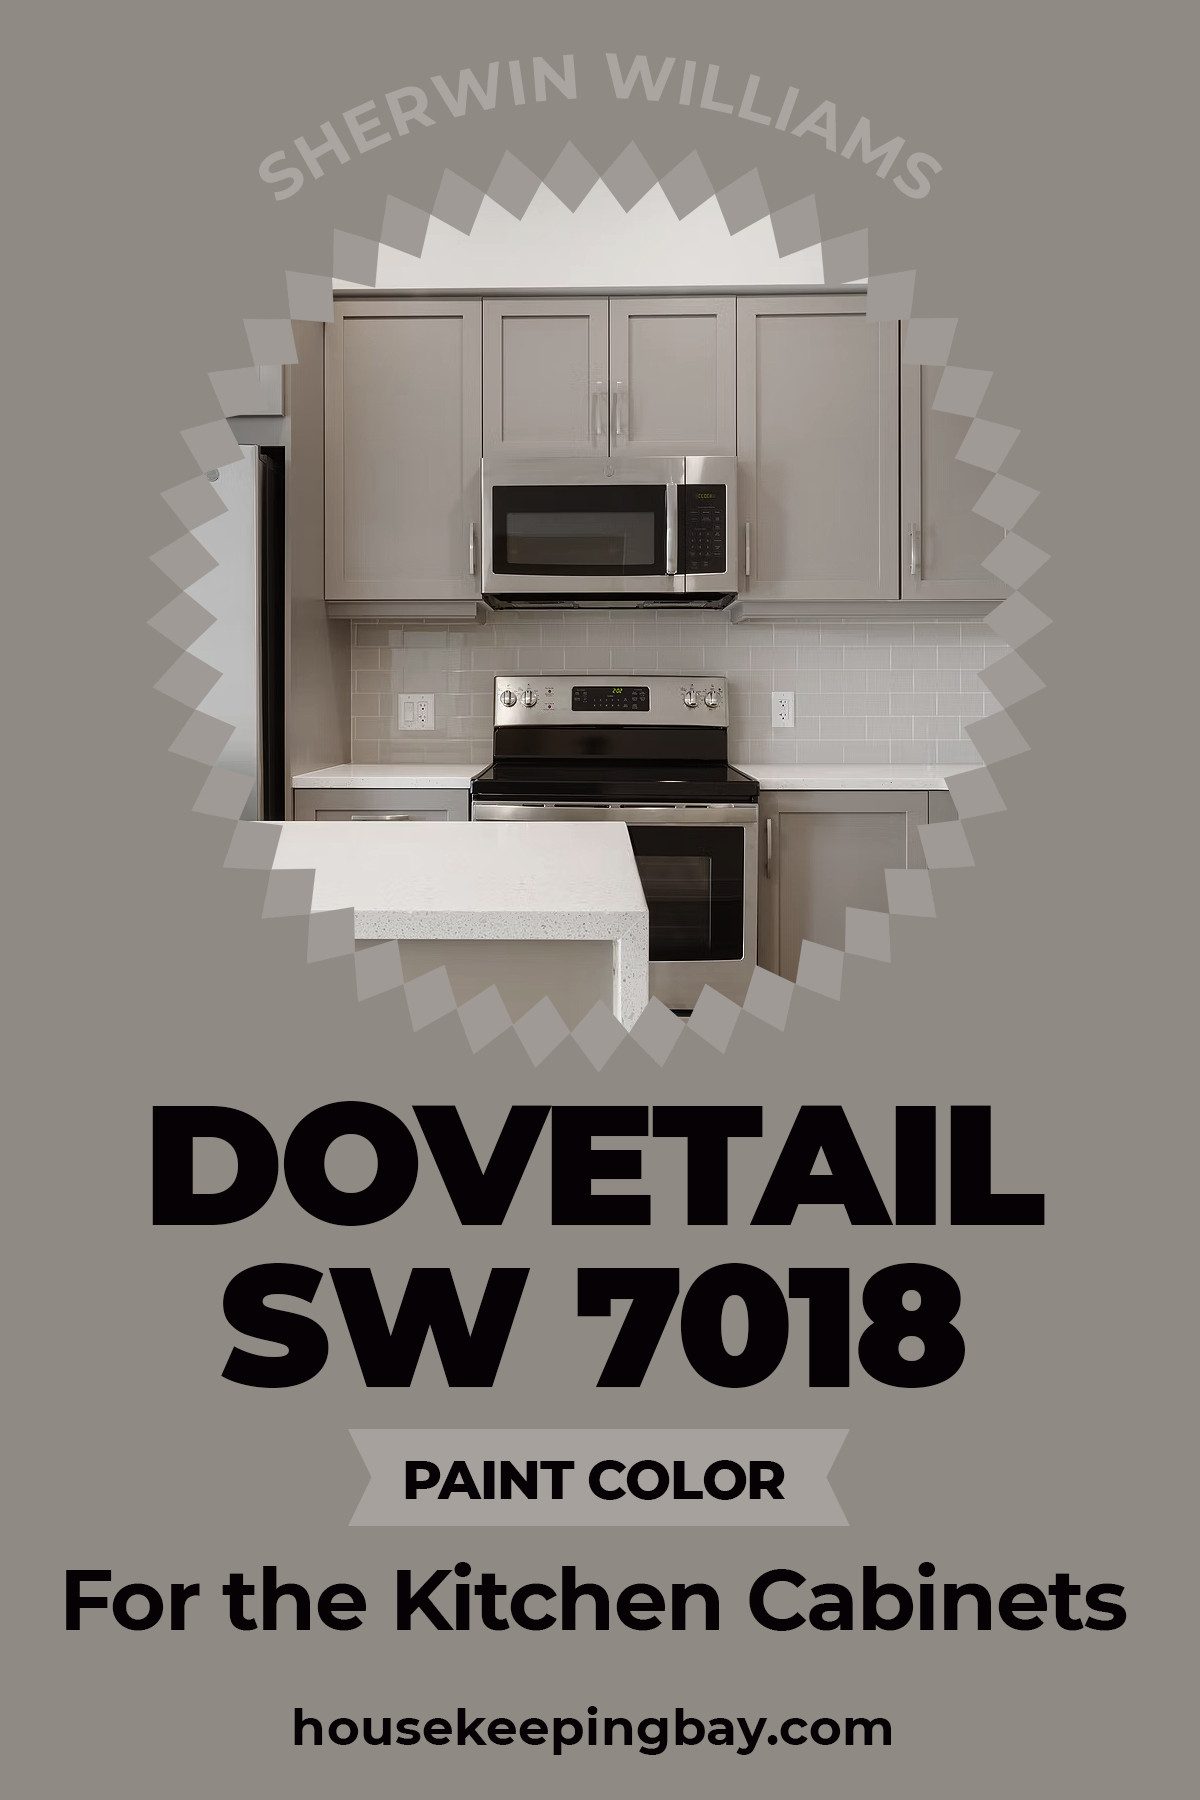 Sherwin Williams Dovetail Paint Color for the kitchen cabinets